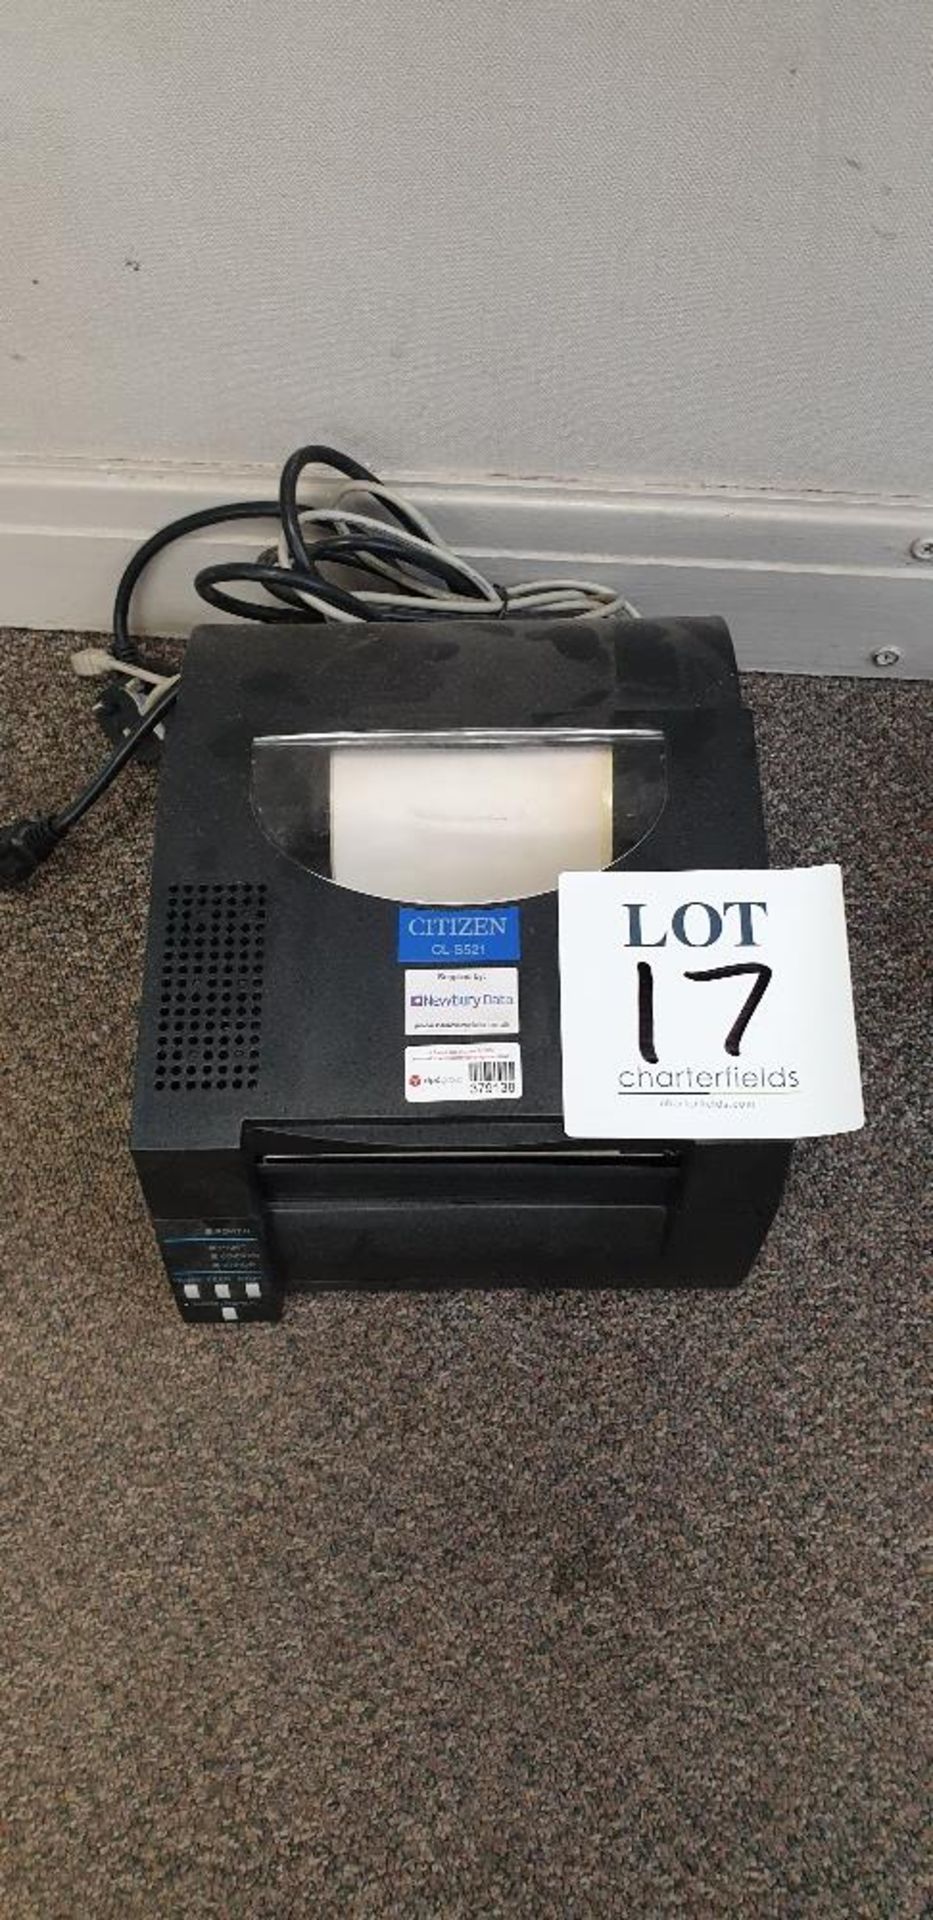 Citizen CL-5521 label printer with cables